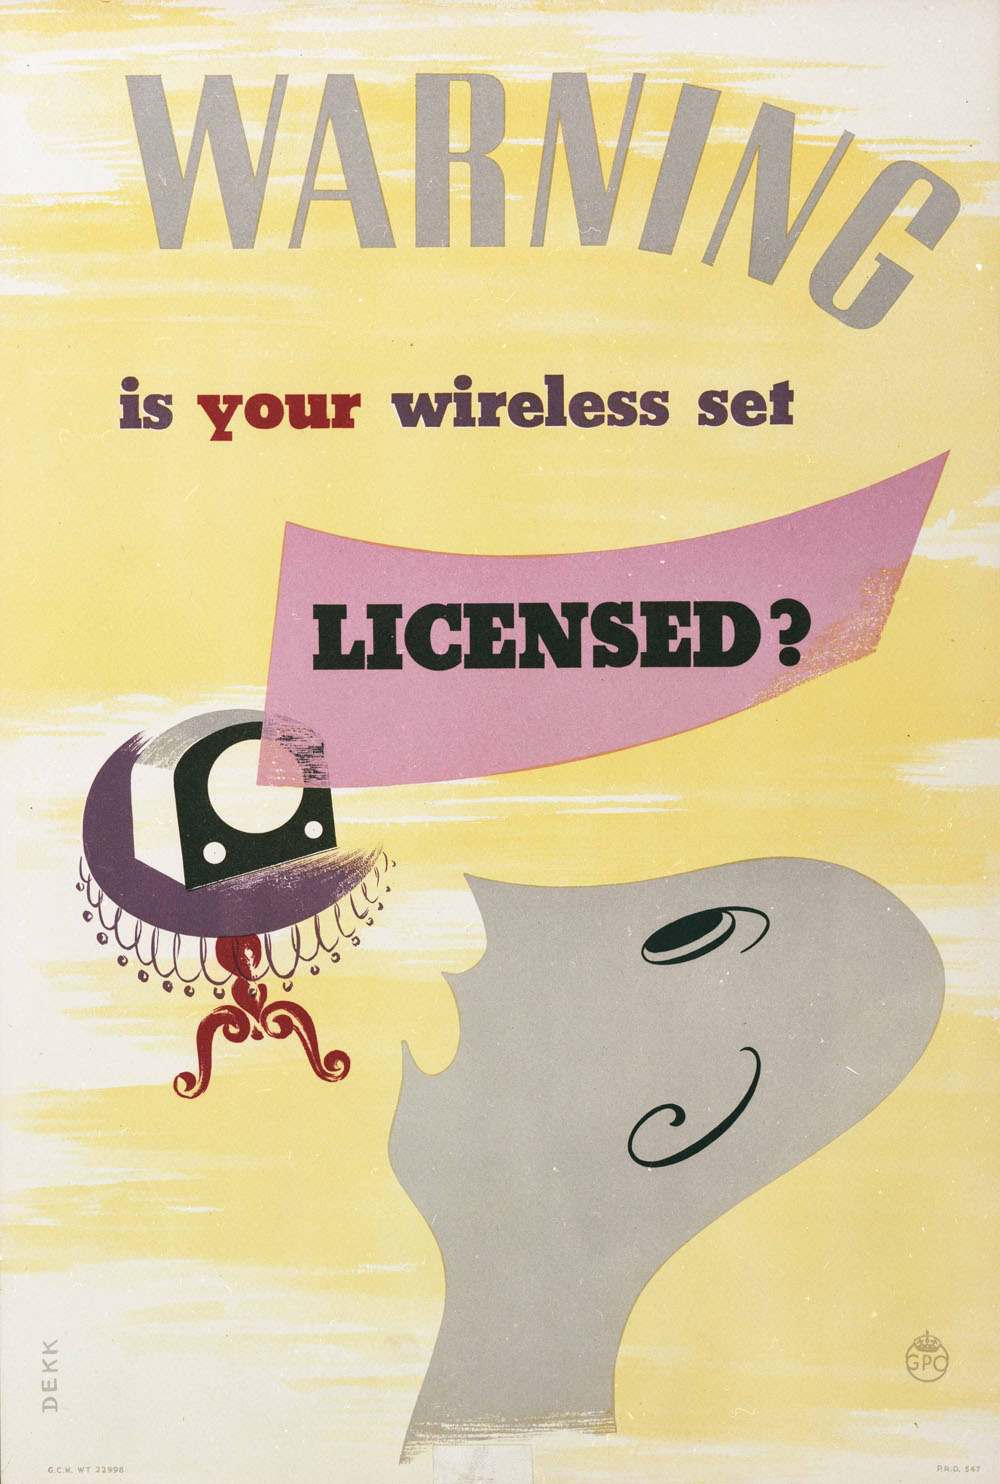 Warning: Is your wireless set licensed?